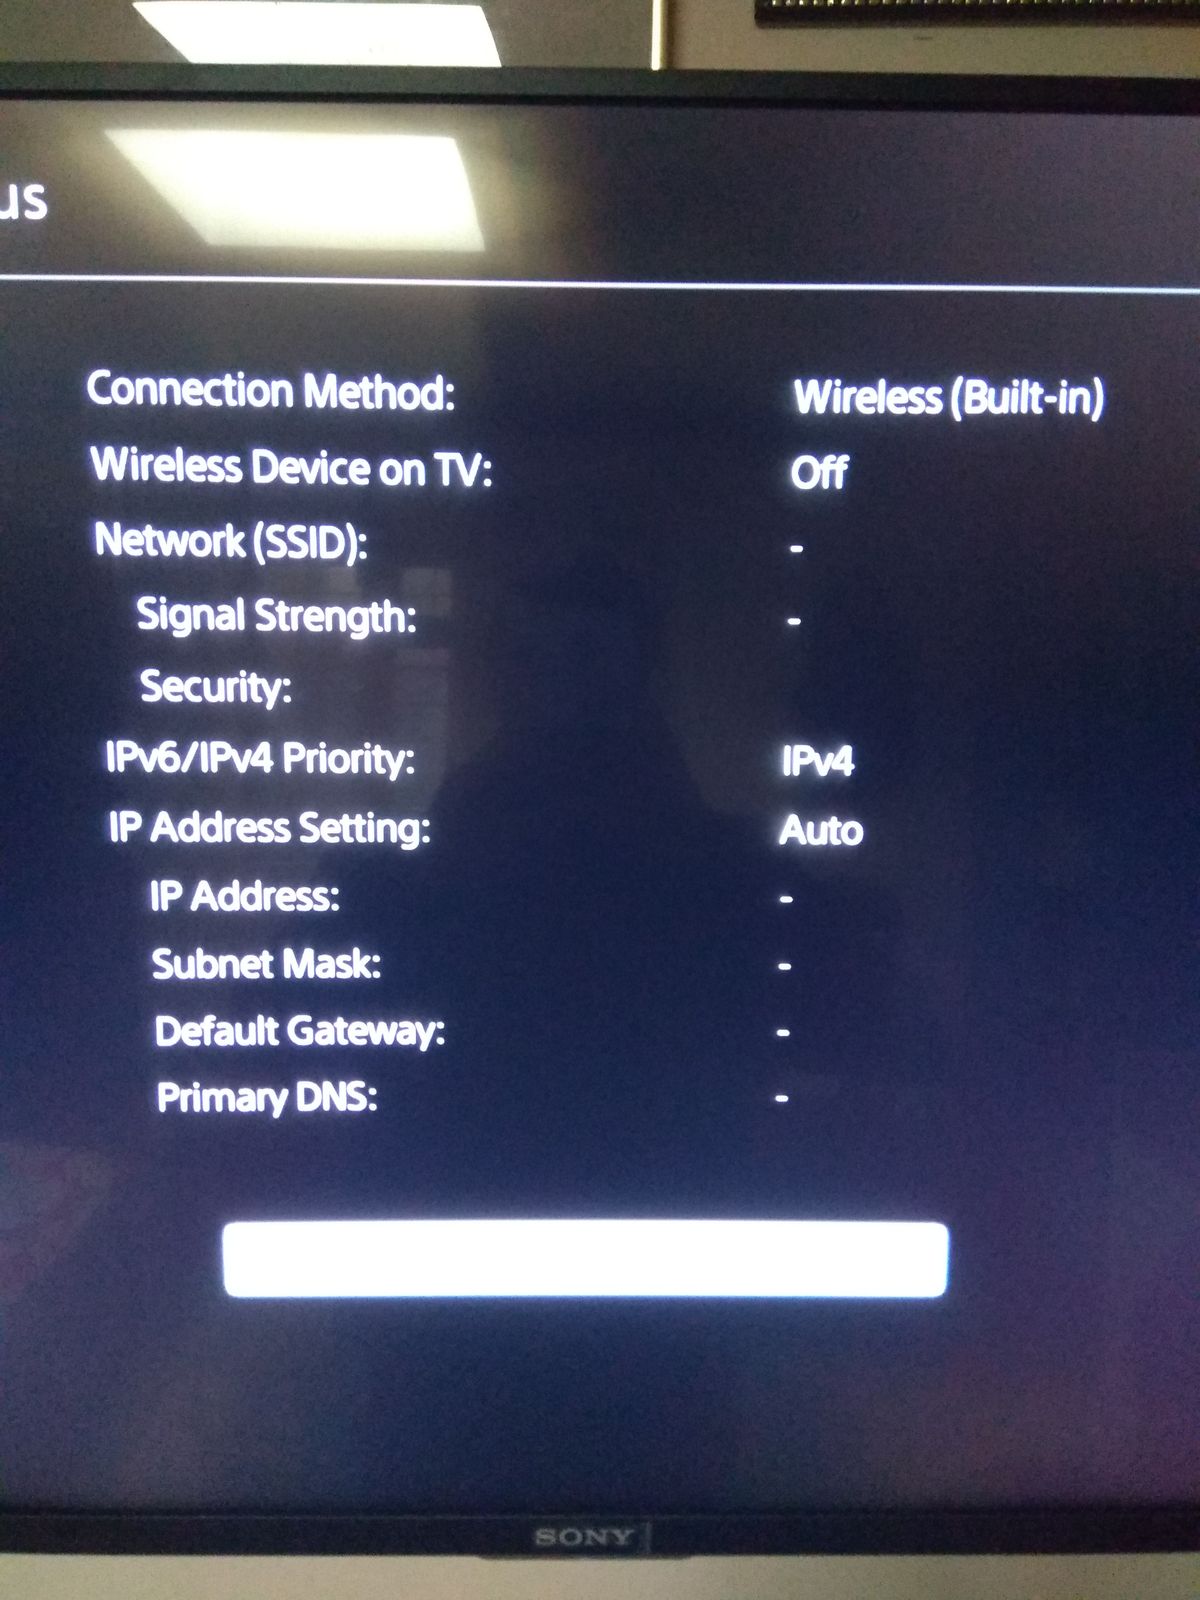 Wireless device on tv is off